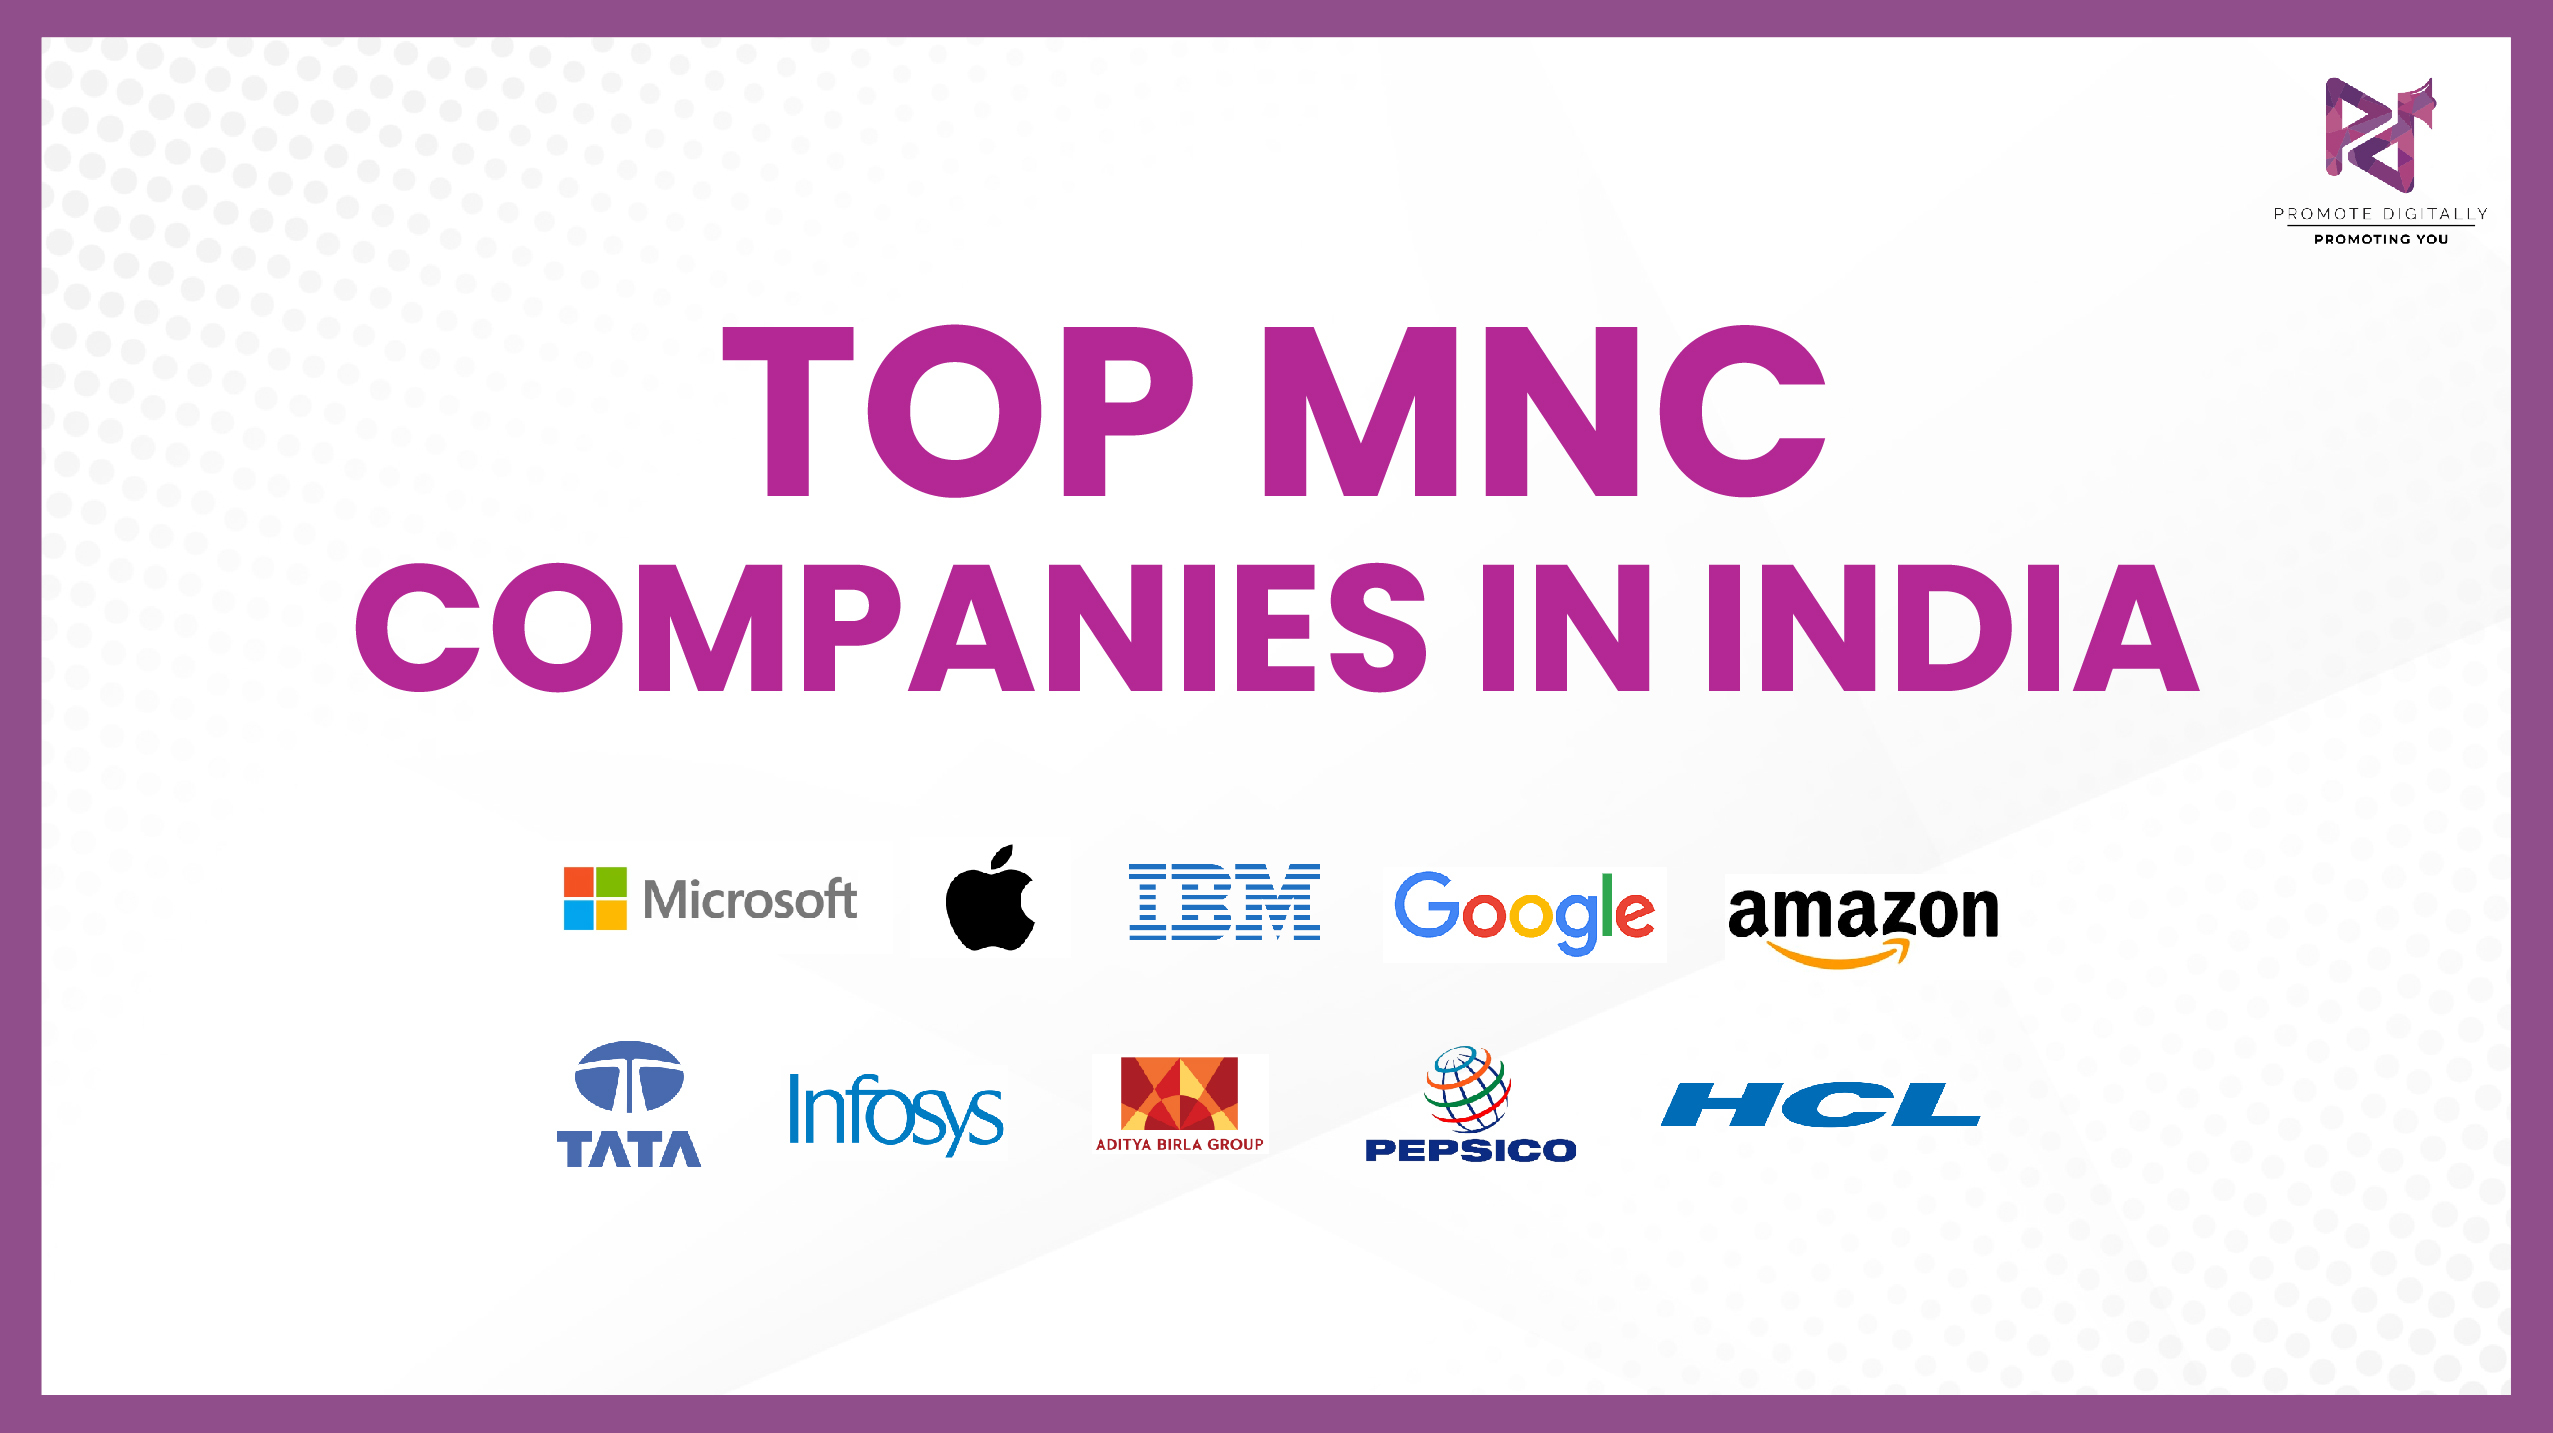 Top MNC companies in india